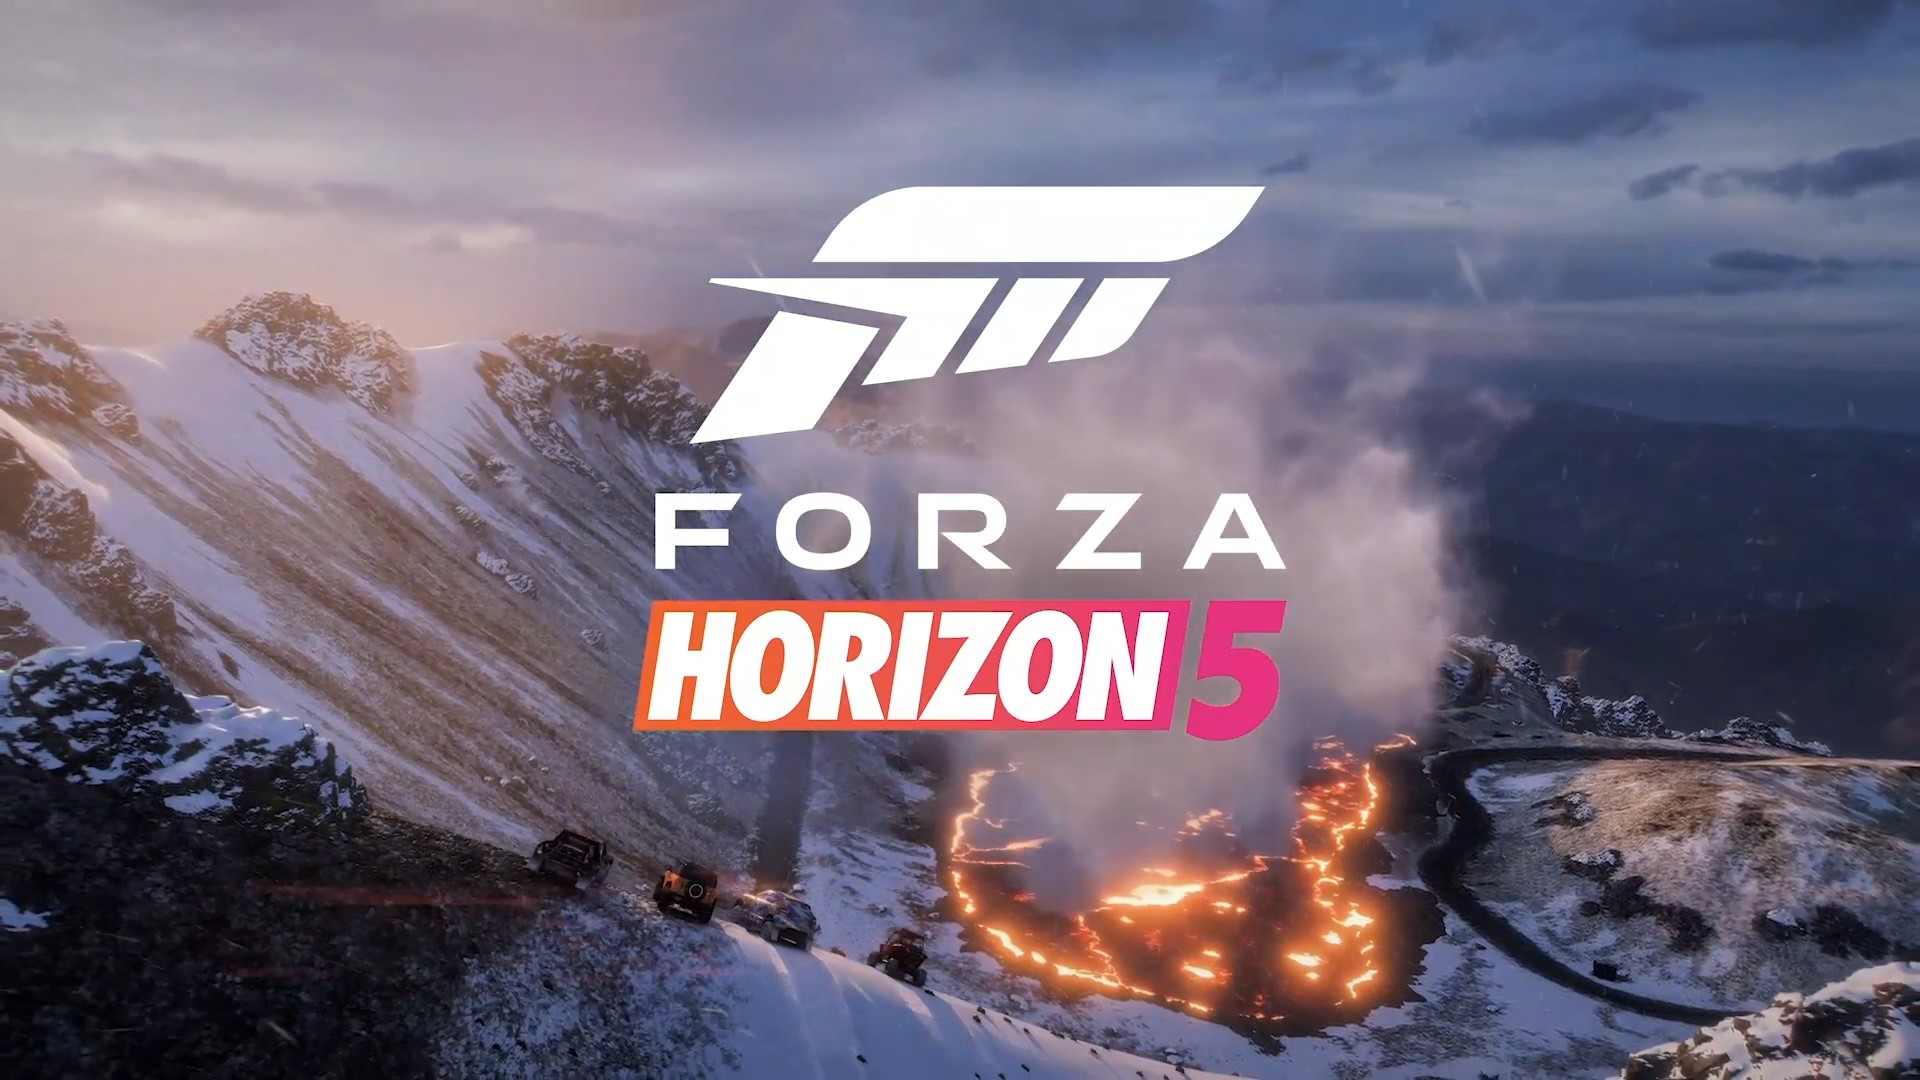 How to Download and Play forza horizon 4 🔥 on PC 